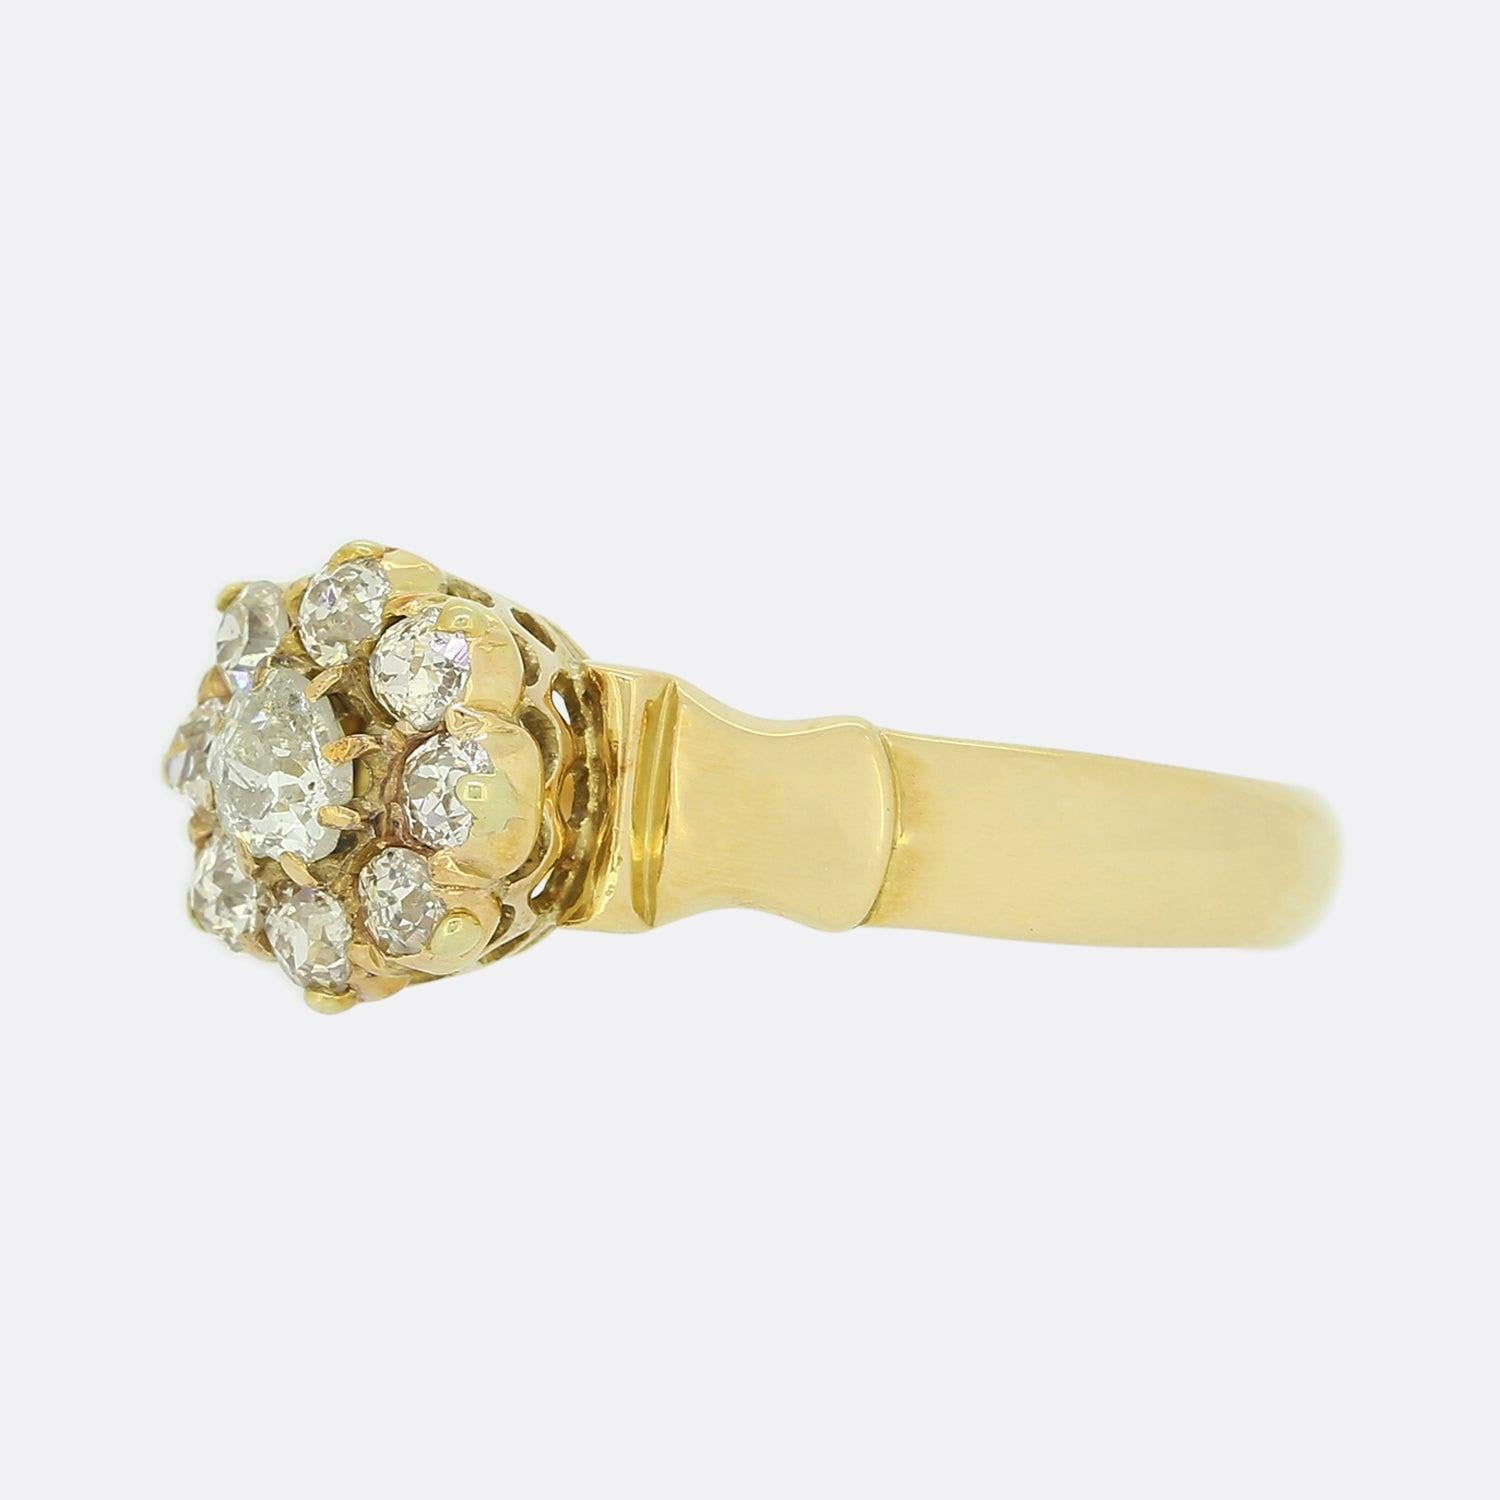 This is a victorian 18ct yellow gold diamond daisy cluster ring. The ring plays host to a central old cut diamond that is surrounded by a cluster of eight smaller old cut diamonds. 

Condition: Used (Very Good)
Weight: 3.5 grams
Size: O
Face